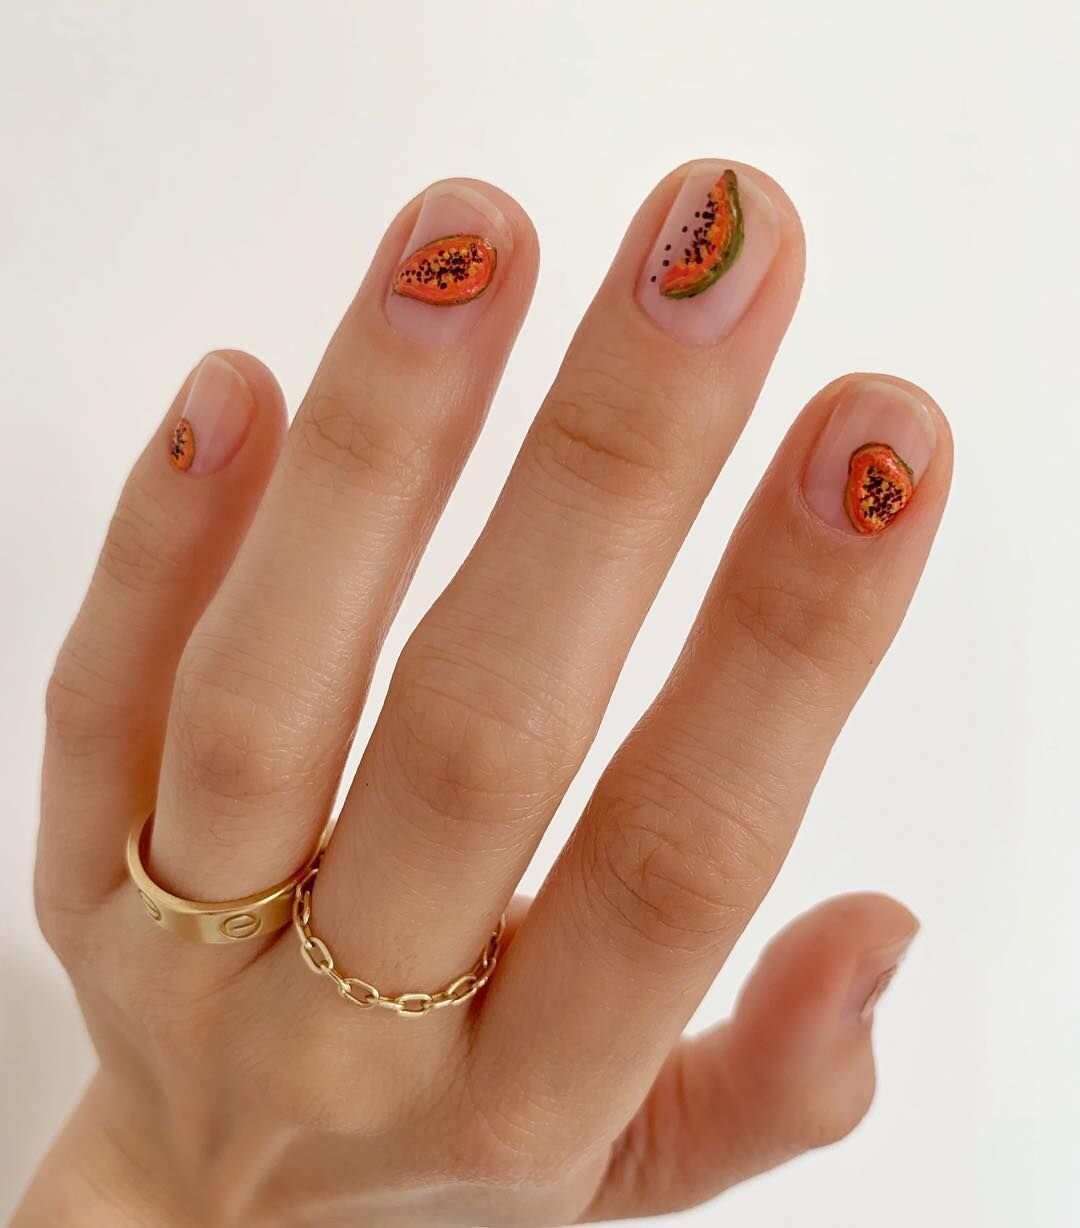 10. 15 Nail Designs Inspired by Your Favorite Summer Fruits